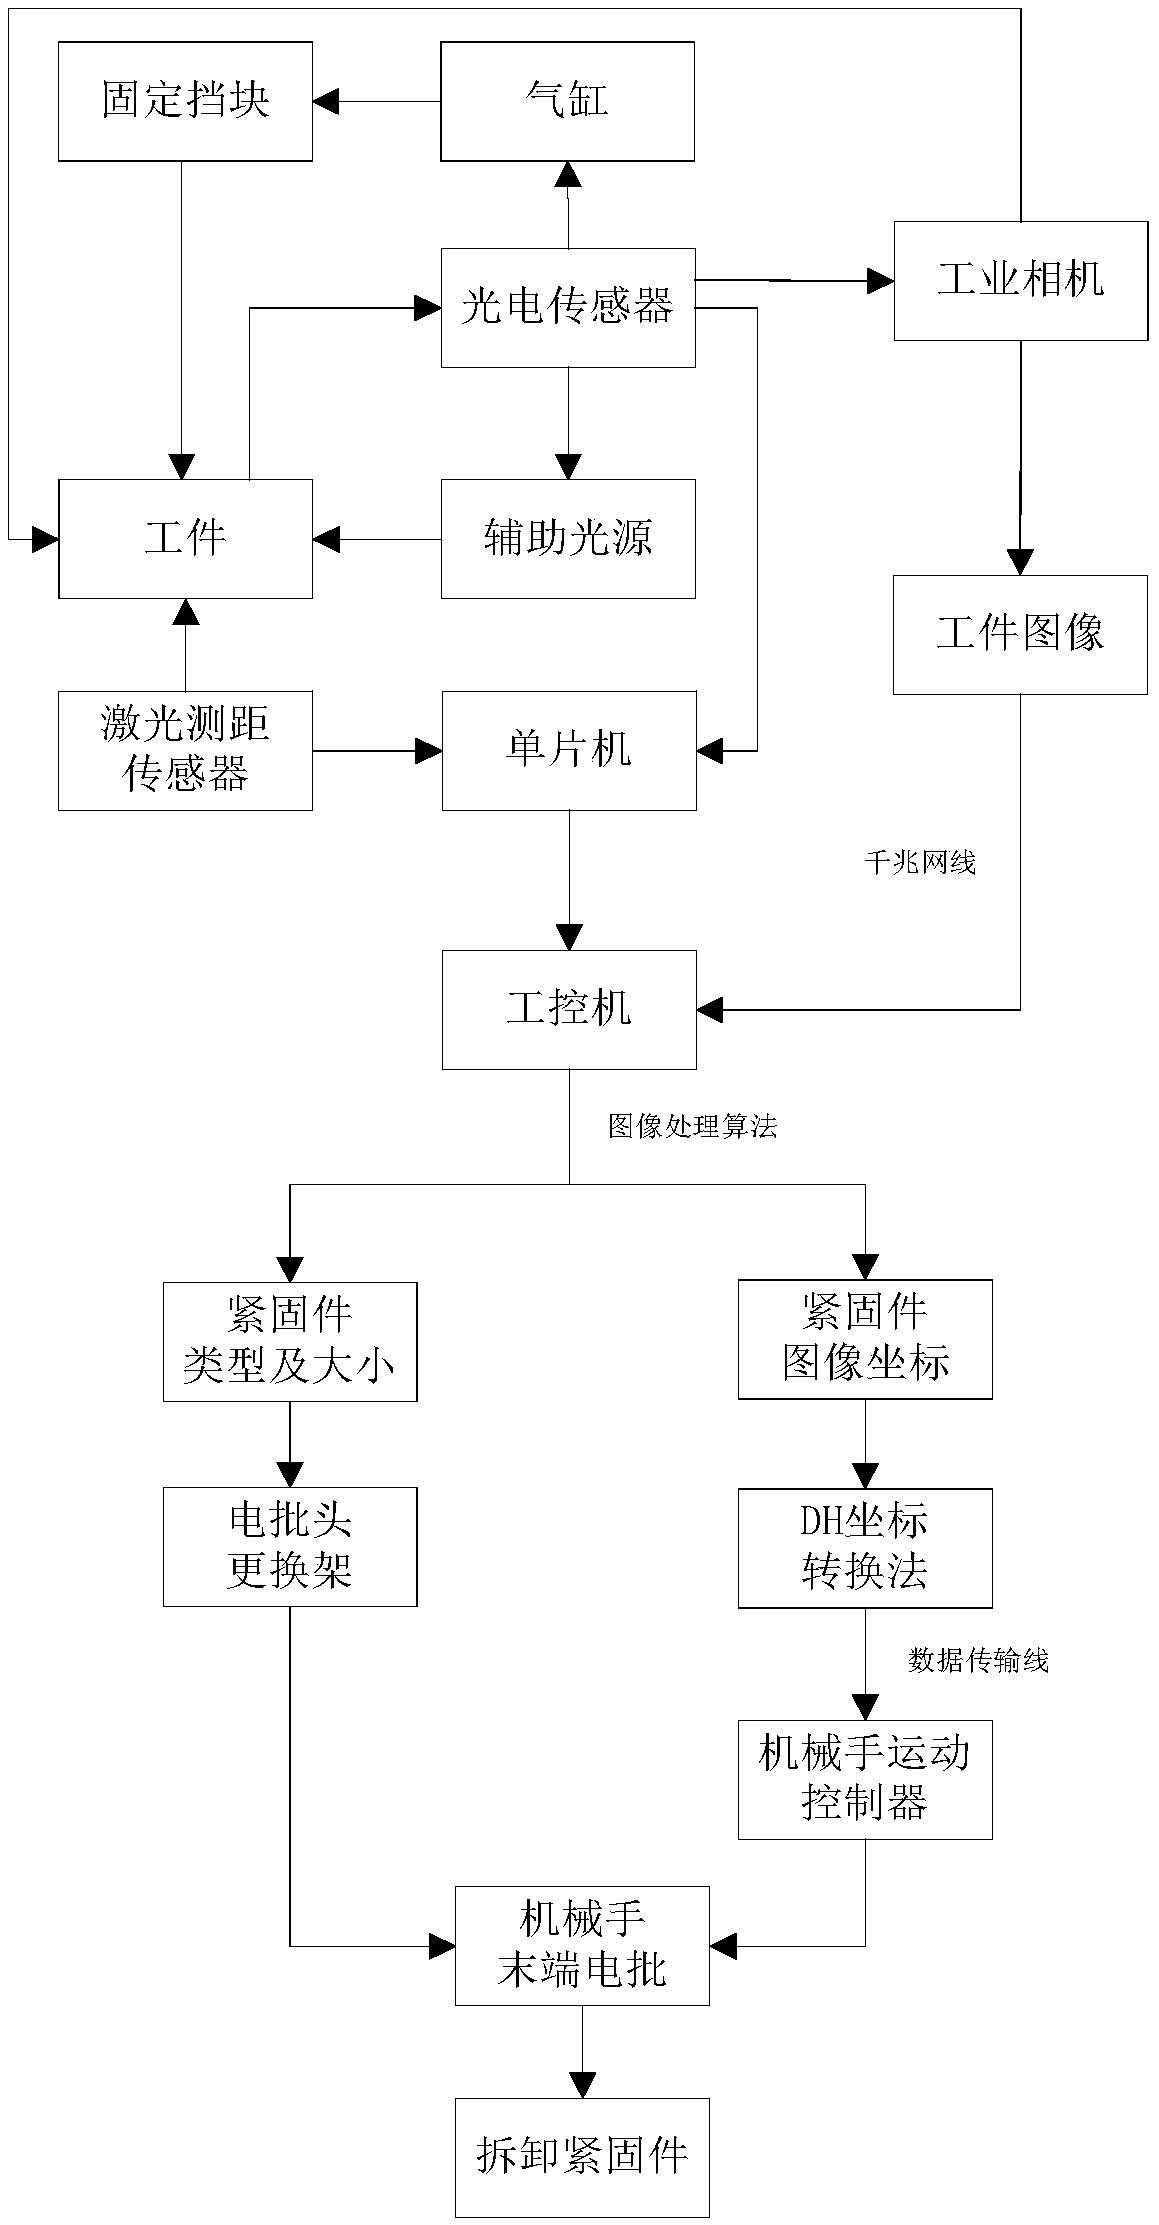 Automatic fastener dismounting system and method based on machine vision